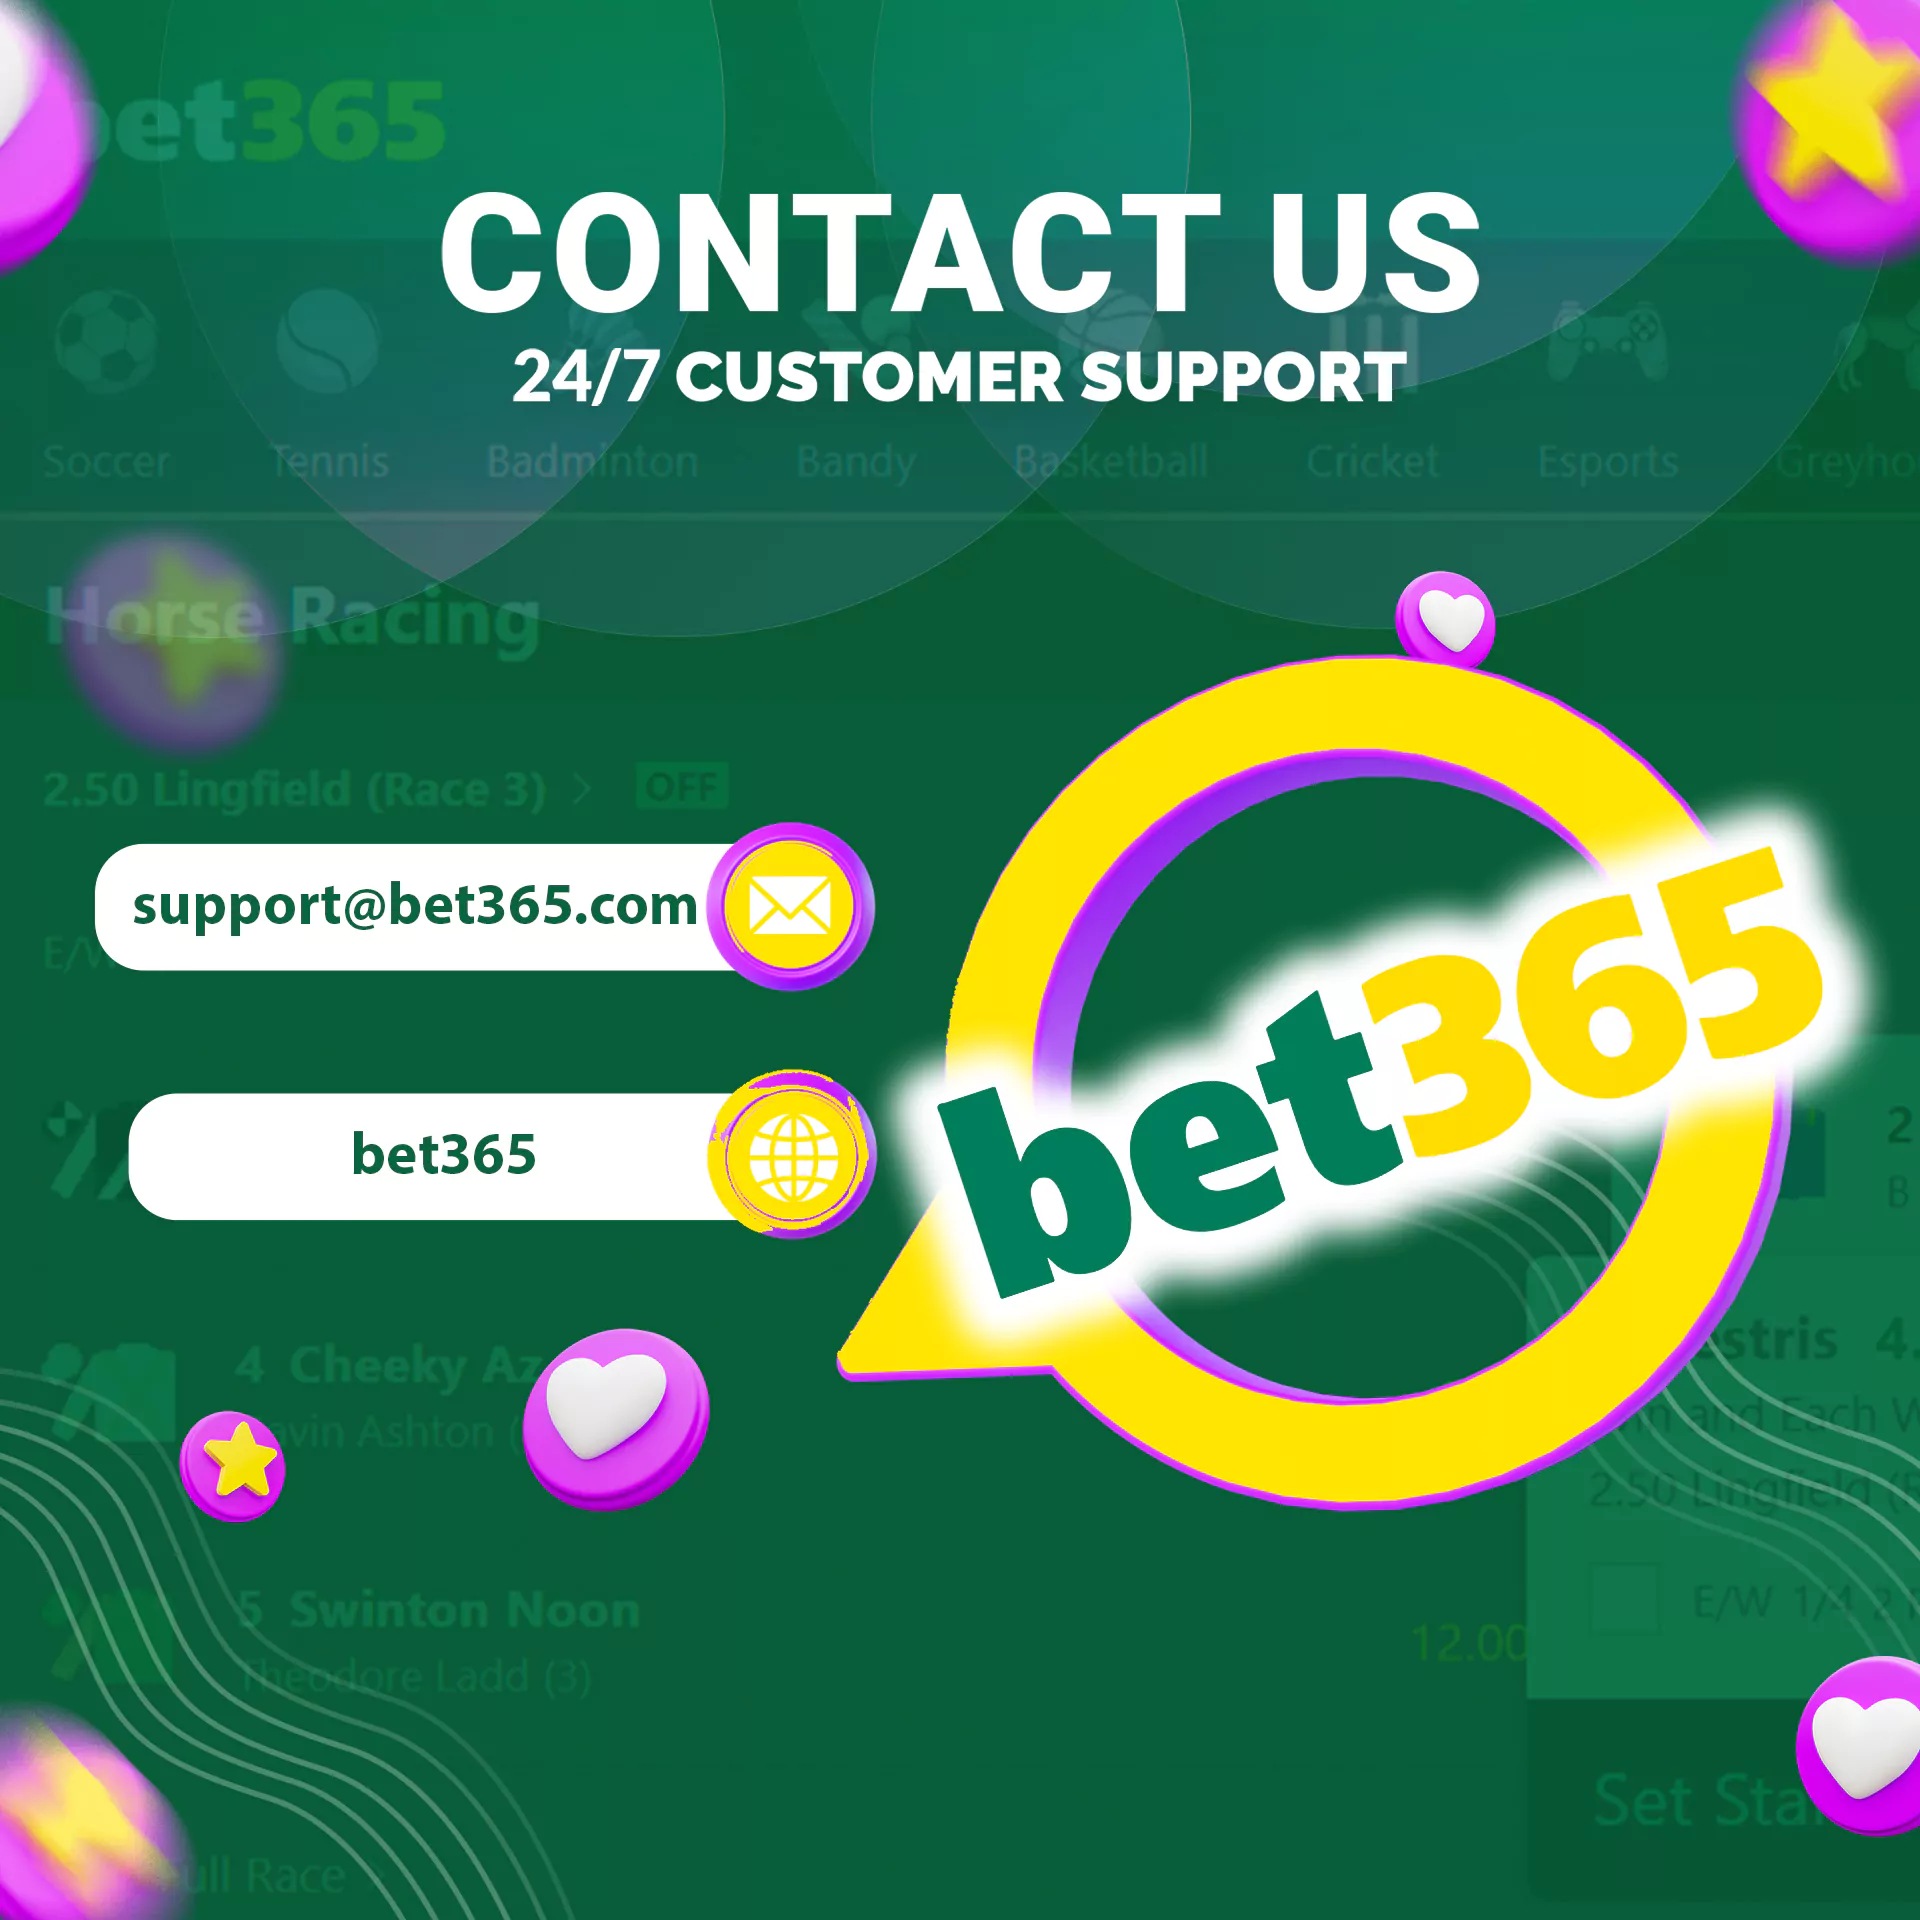 The Bet365 support team works 24/7.